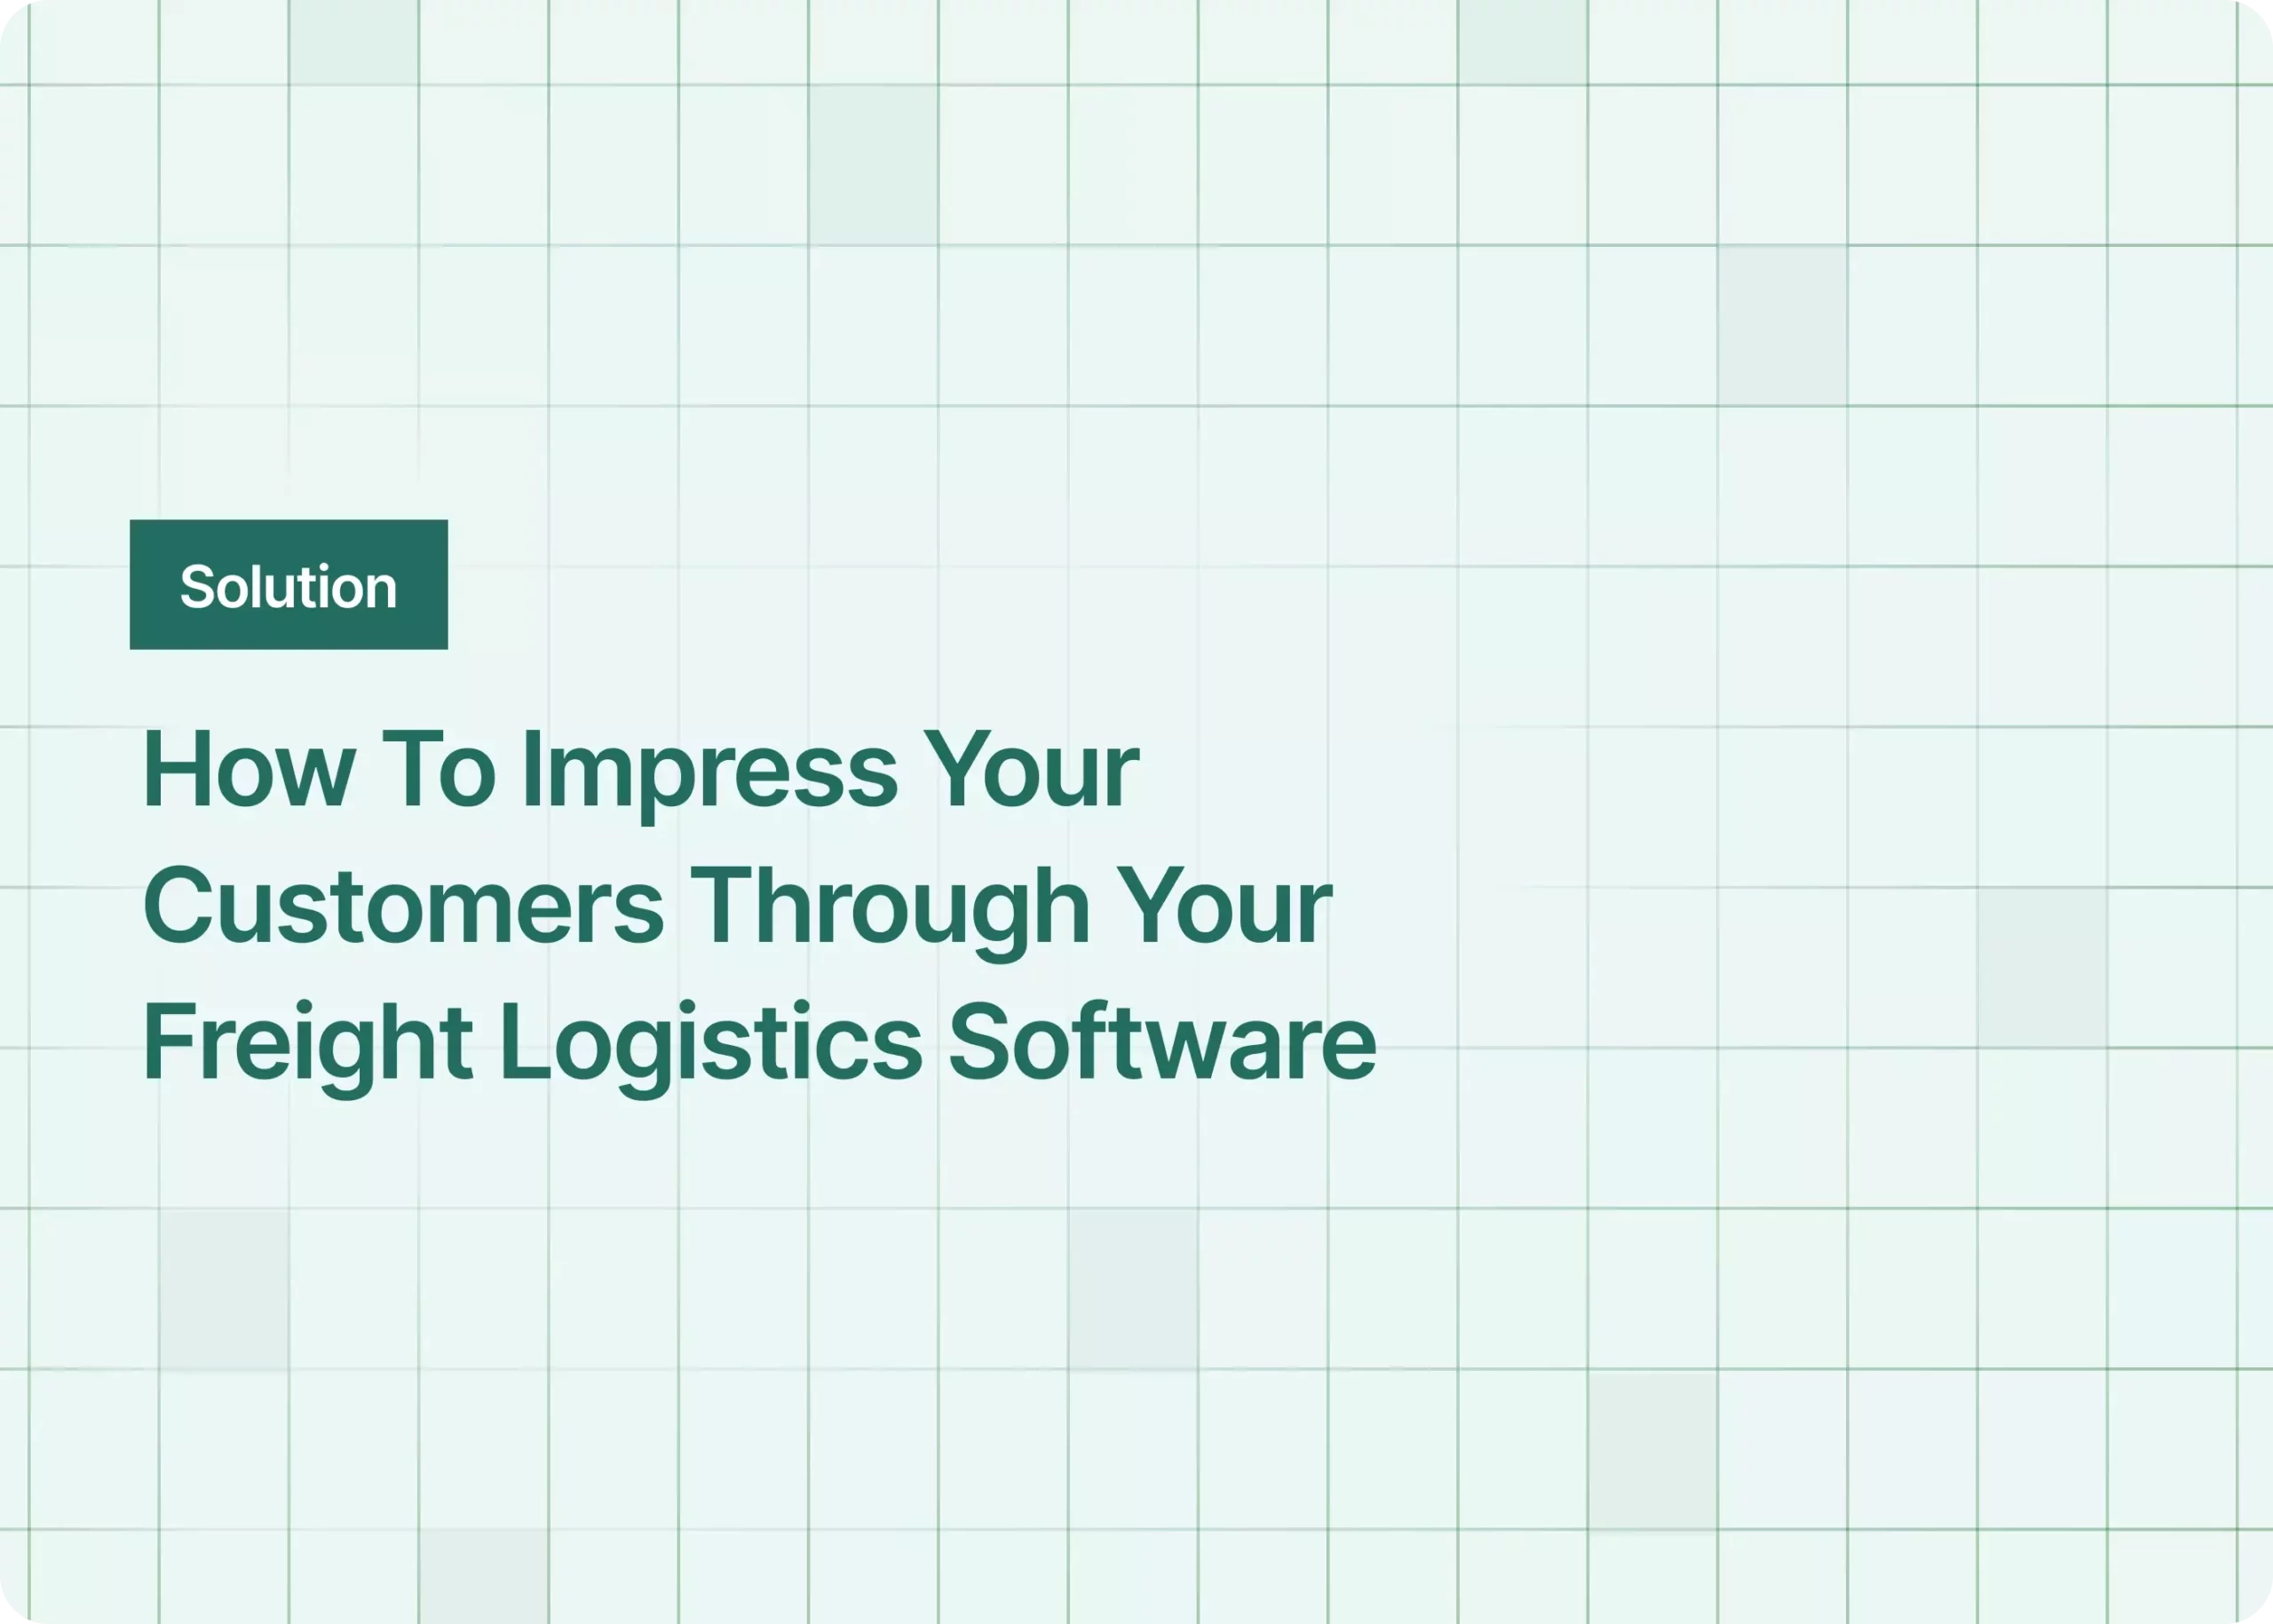 How To Impress Your Customers Through Your Freight Logistics Software